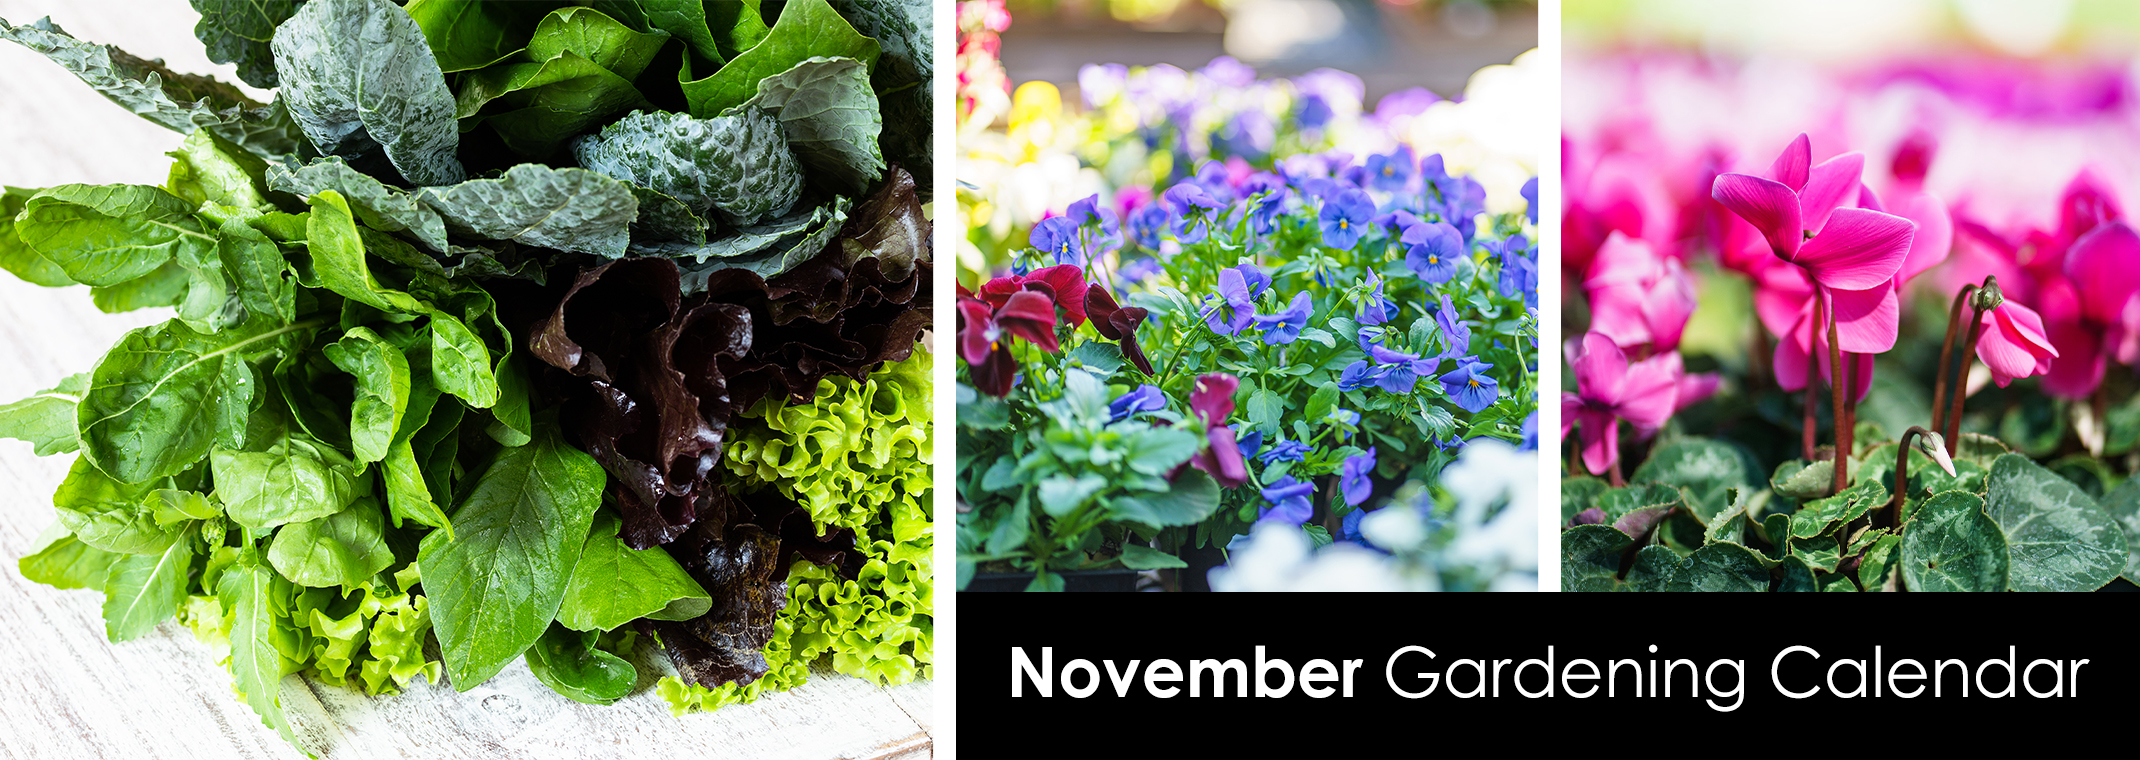 A variety of leafy green vegetables, pansies, and pink cyclamens.